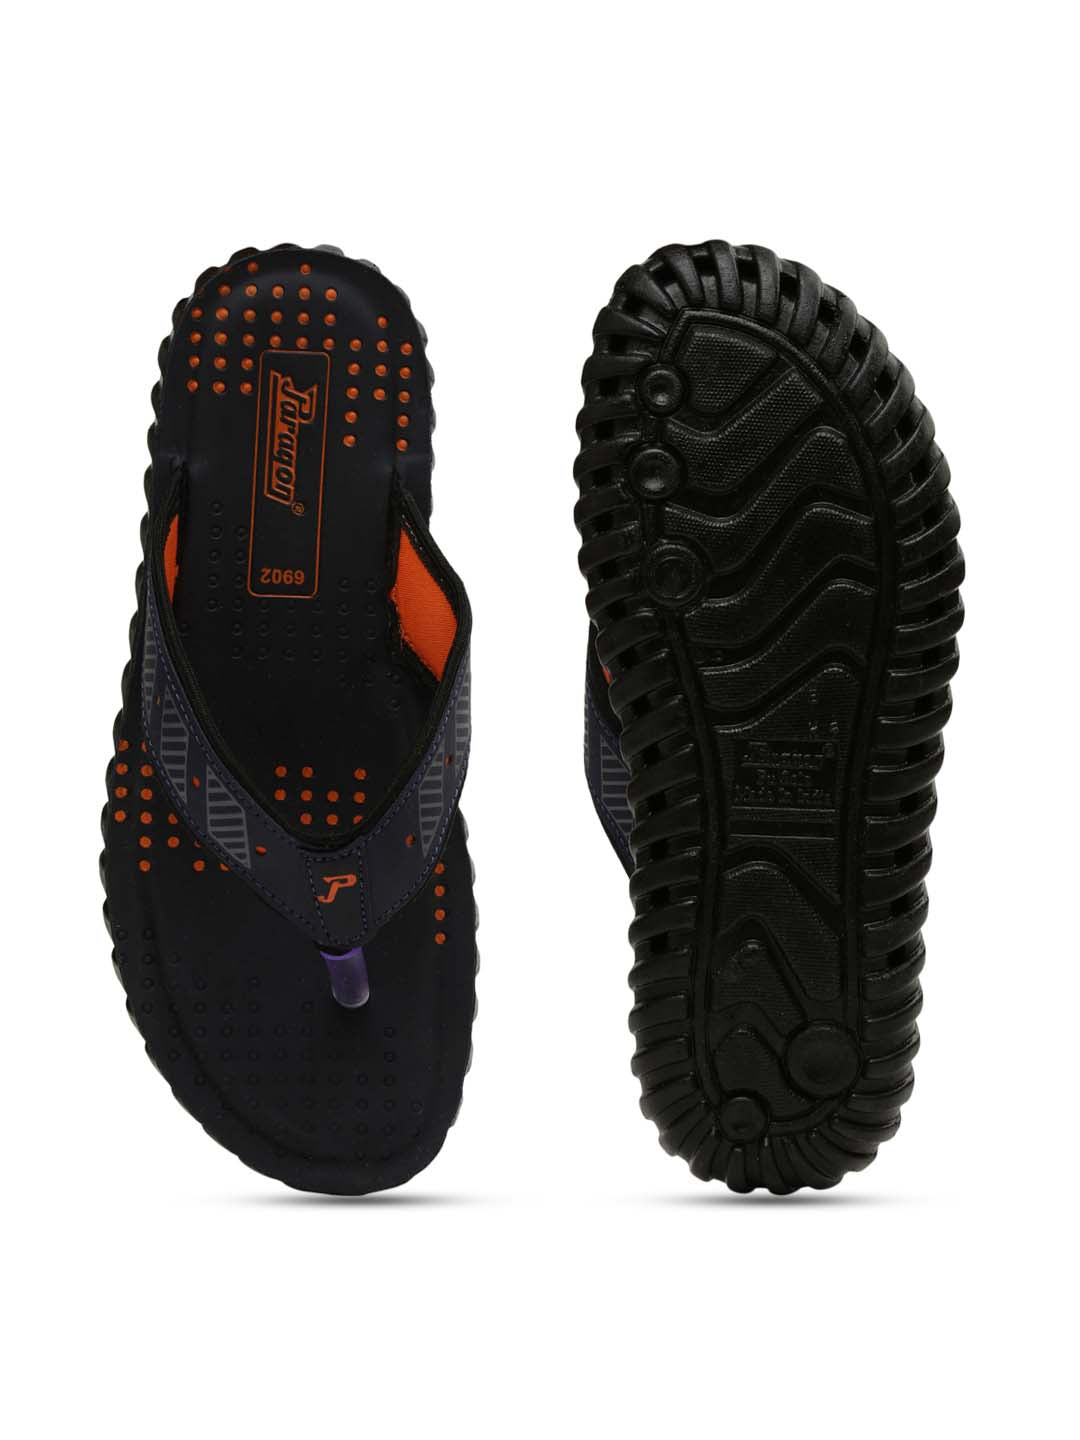 Paragon PU6902G Men Stylish Lightweight Flipflops | Comfortable with Anti skid soles | Casual &amp; Trendy Slippers | Indoor &amp; Outdoor